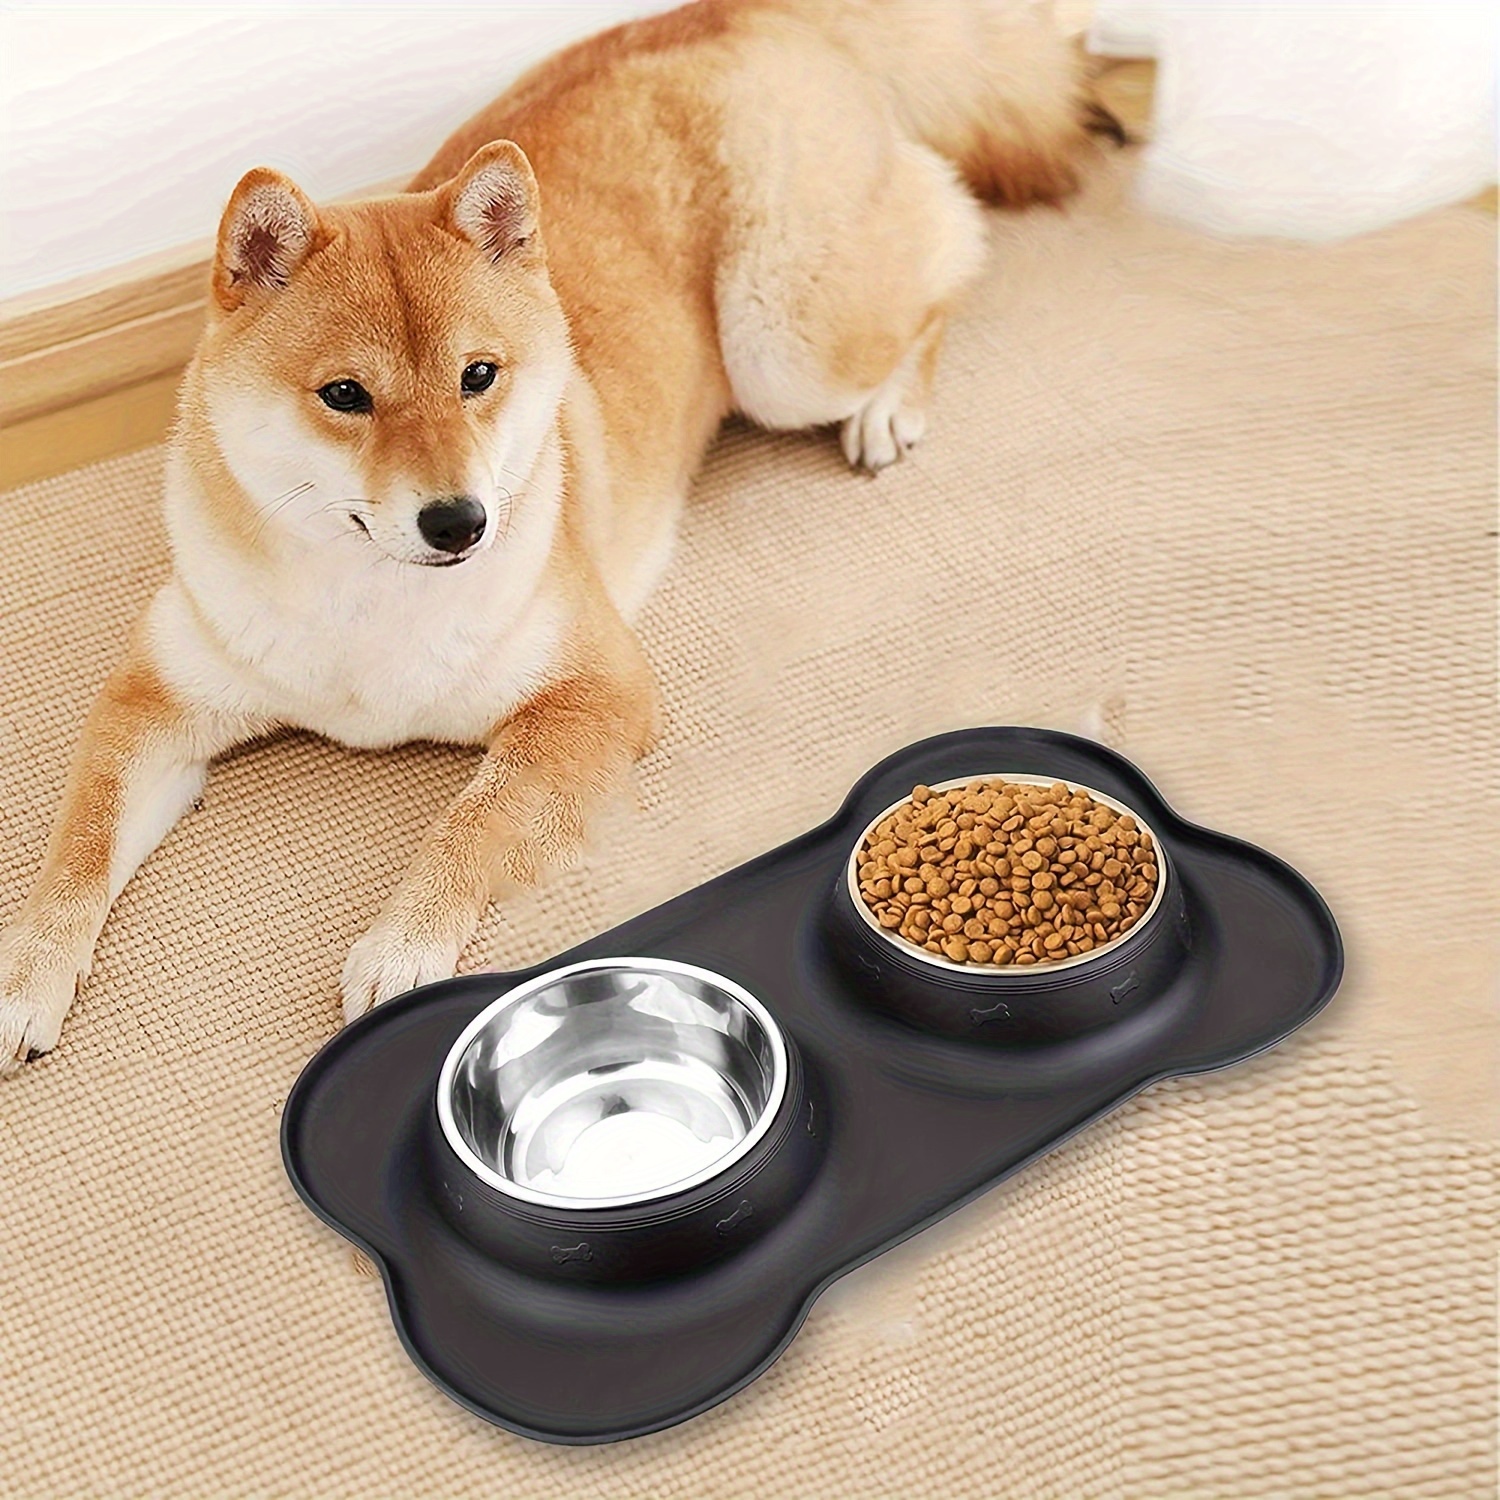 

Bone Shaped Silicone Pet Dog Feeding Mat With 2pcs Stainless Steel Dog Food Bowl And Water Bowl, Easy To Clean, Prevents Messy